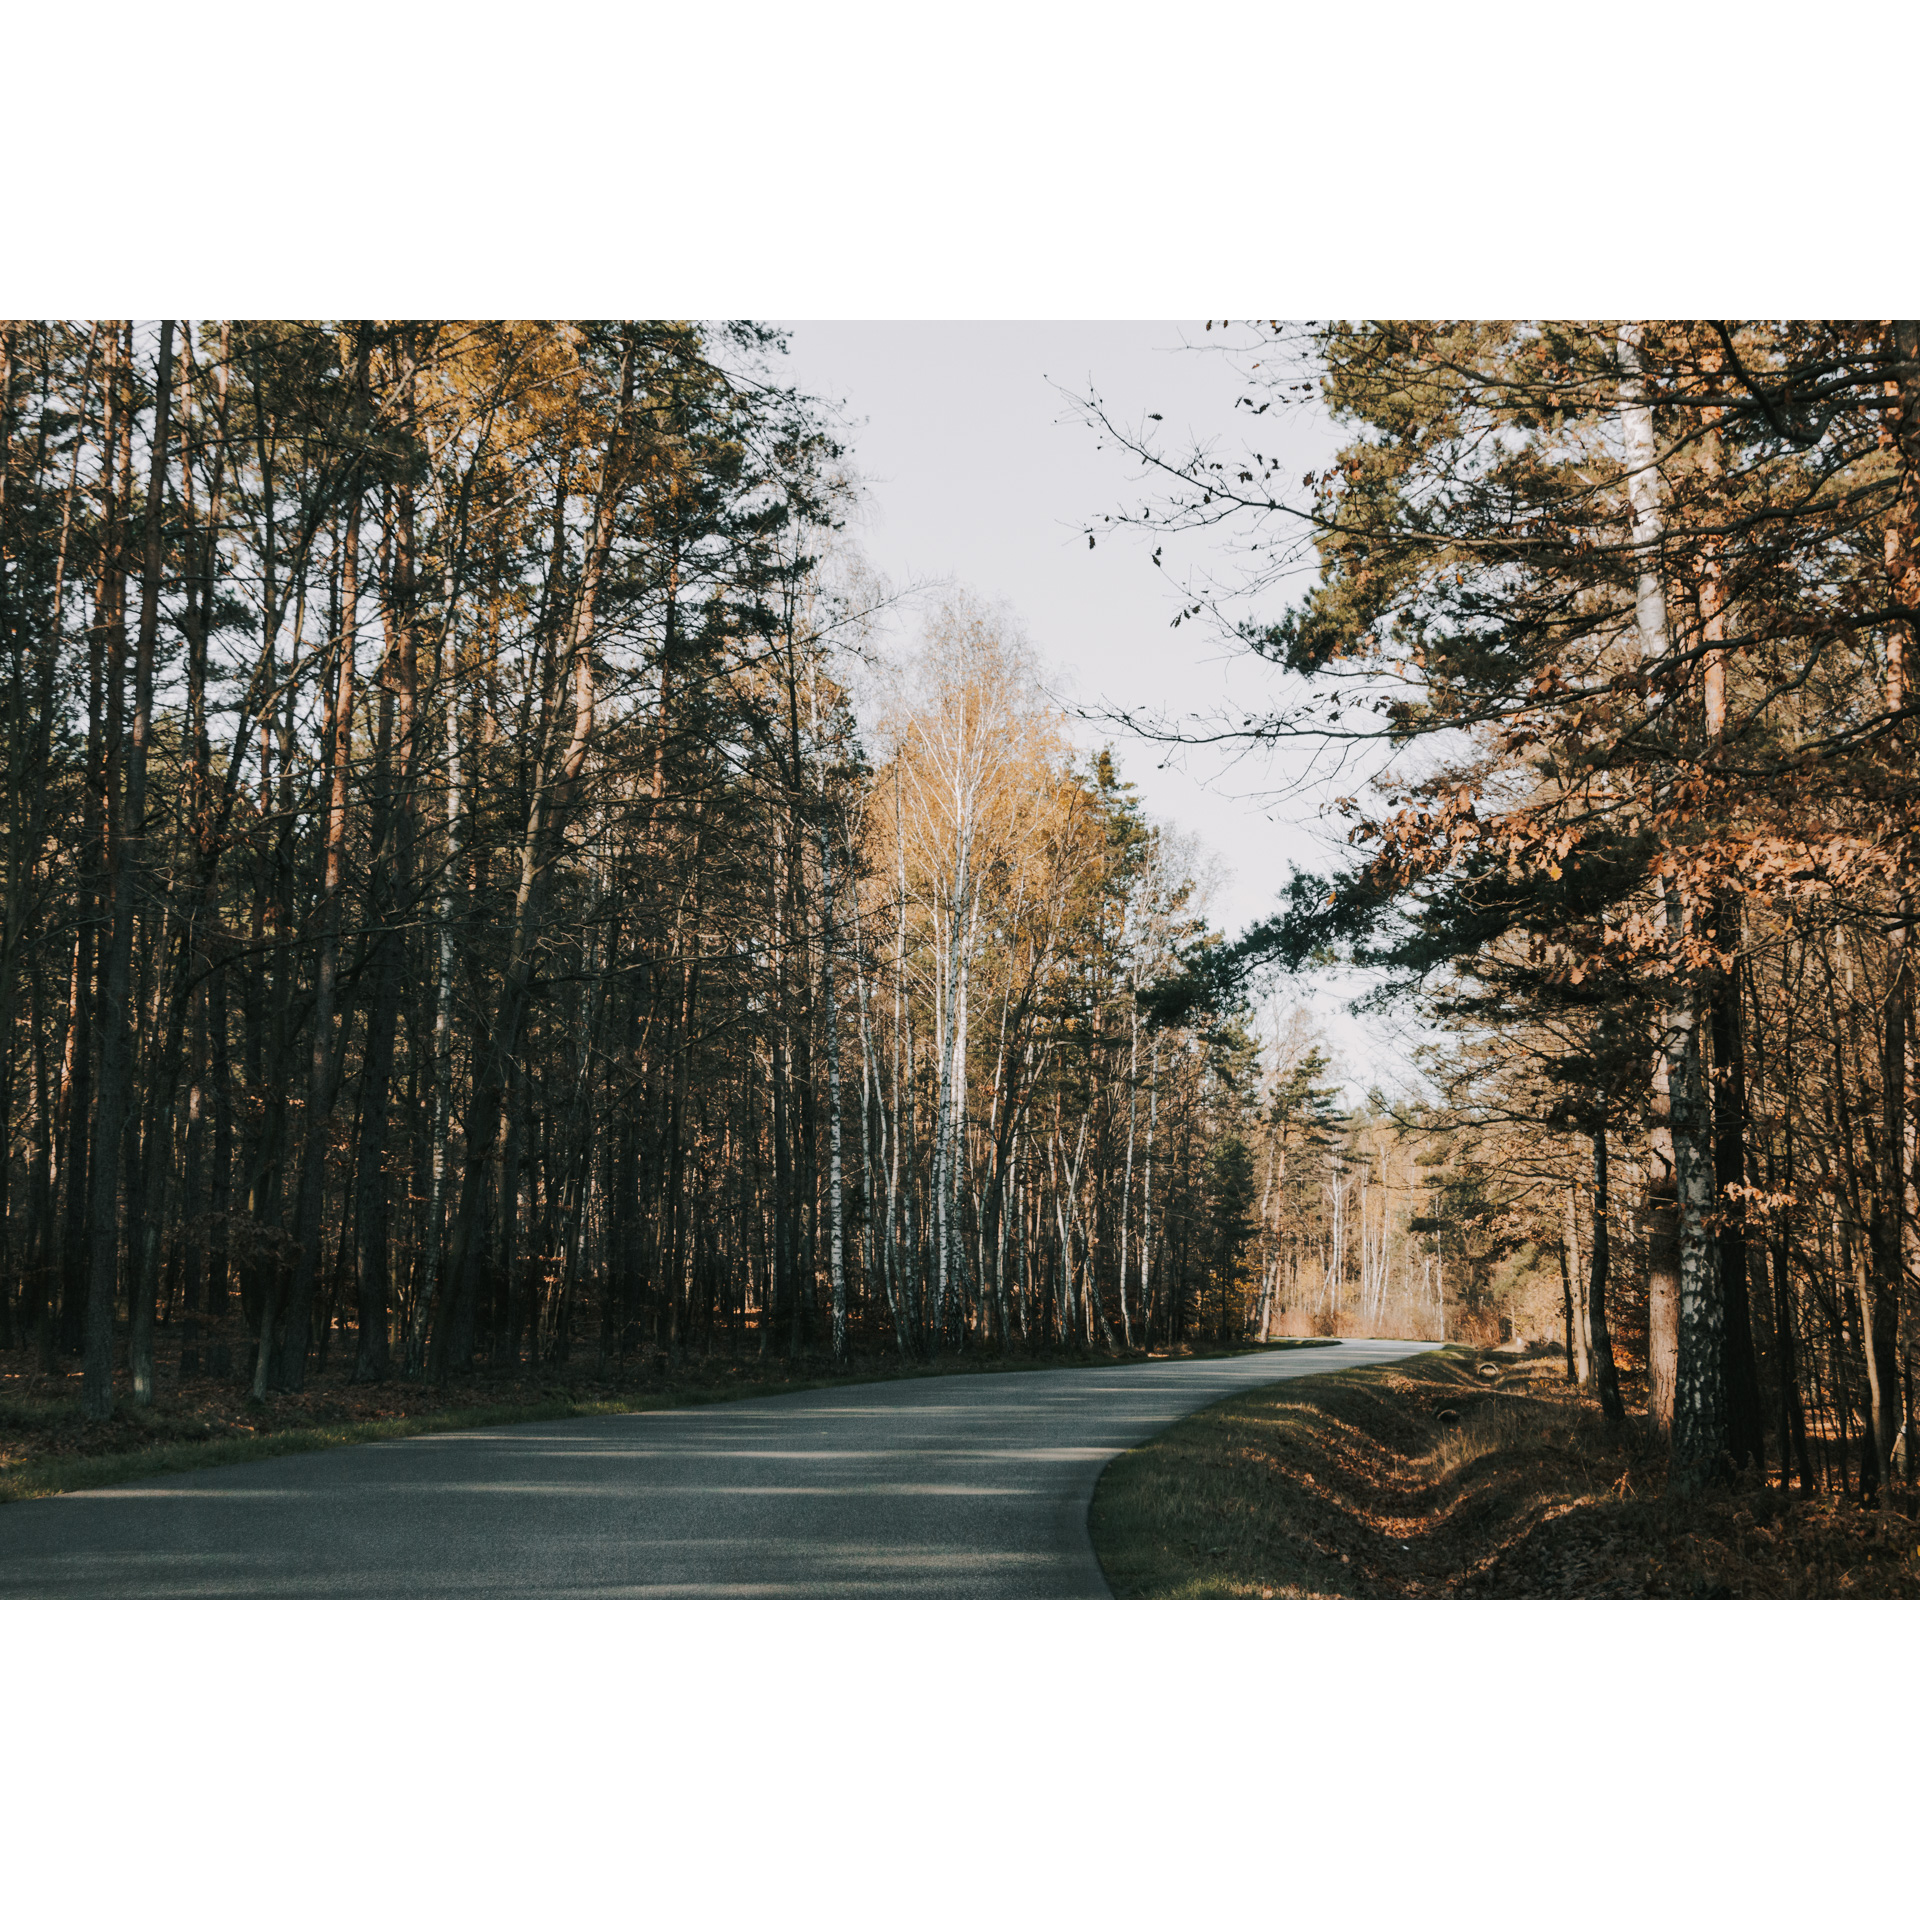 Forest asphalt road turning right among tall coniferous trees